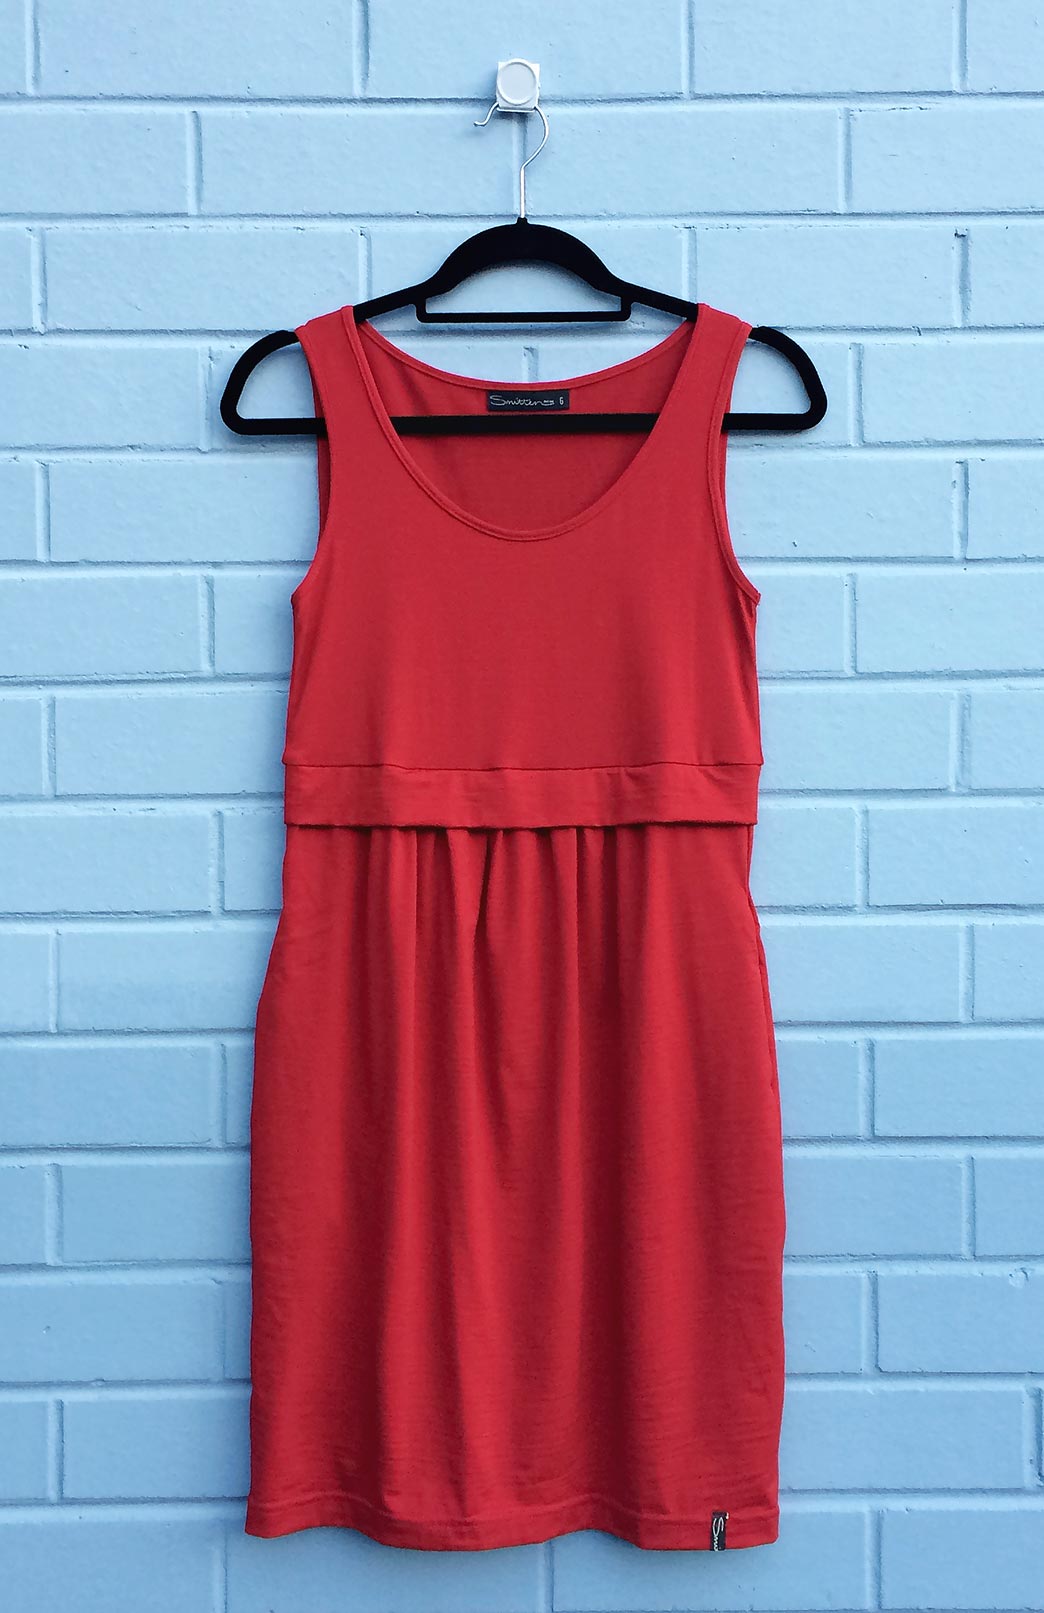 Tulip Dress | Women's Flame Red Merino Wool Fitted Tulip Dress with ...